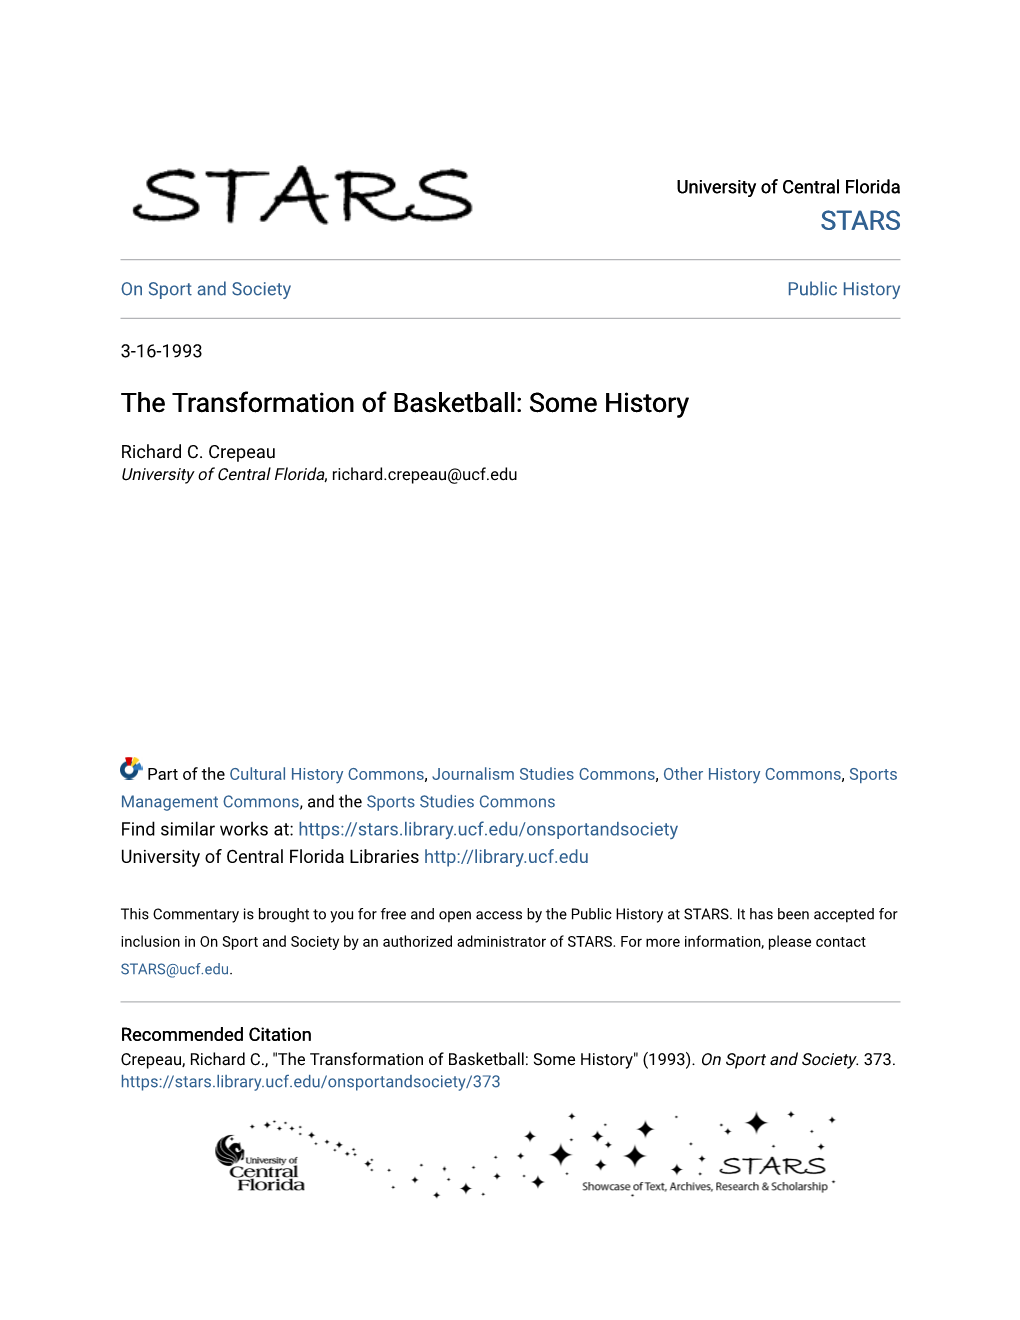 The Transformation of Basketball: Some History